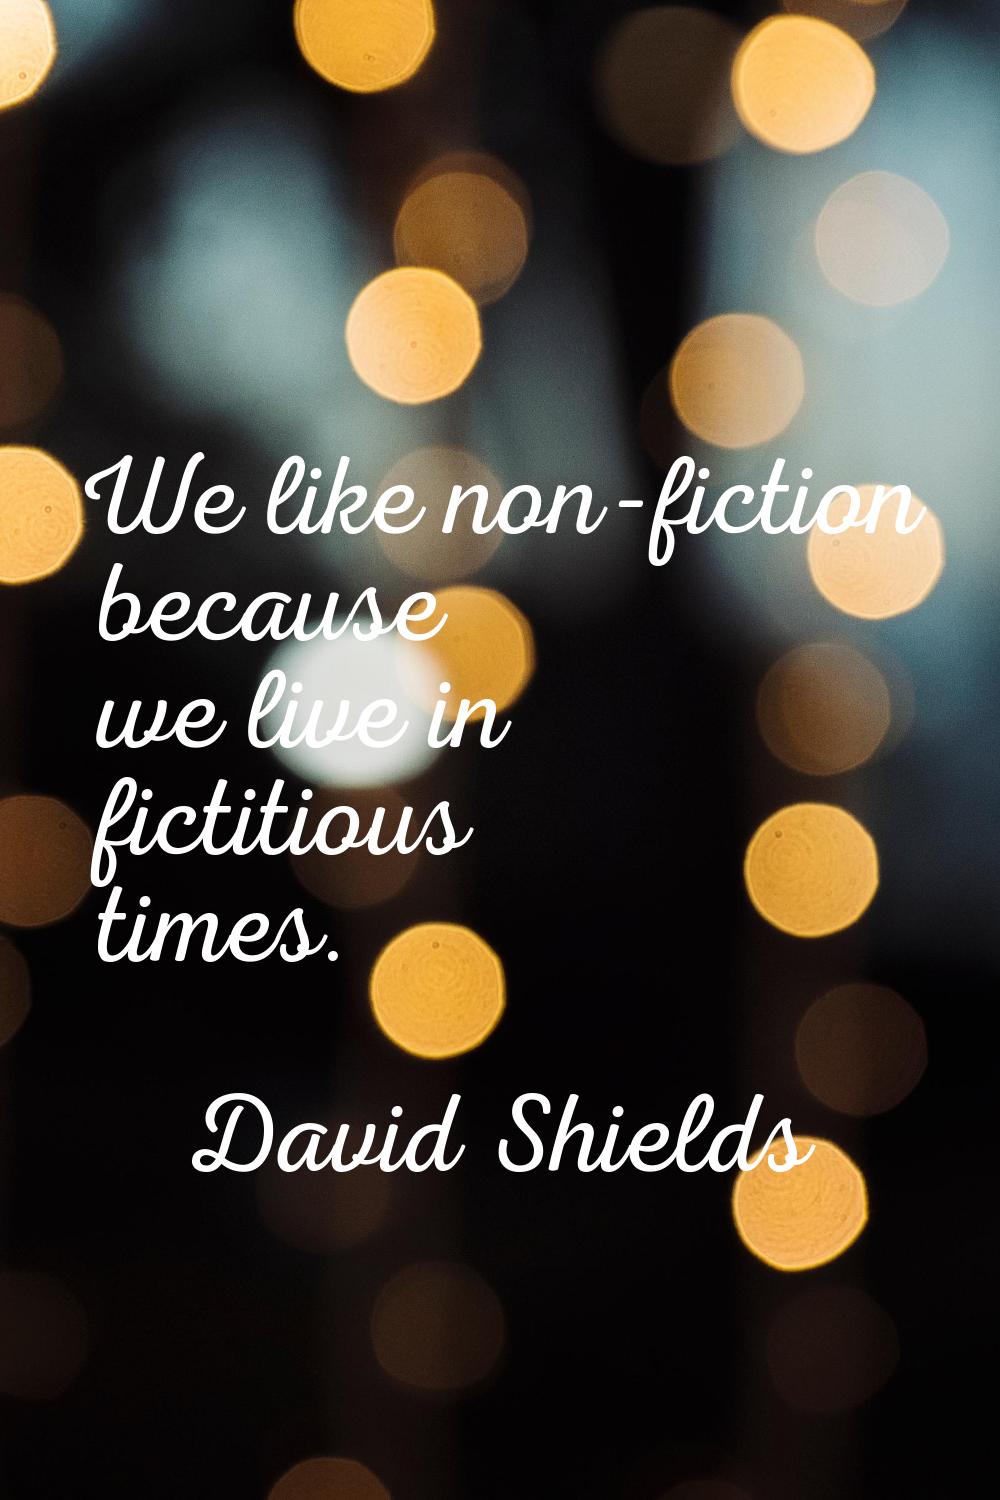 We like non-fiction because we live in fictitious times.